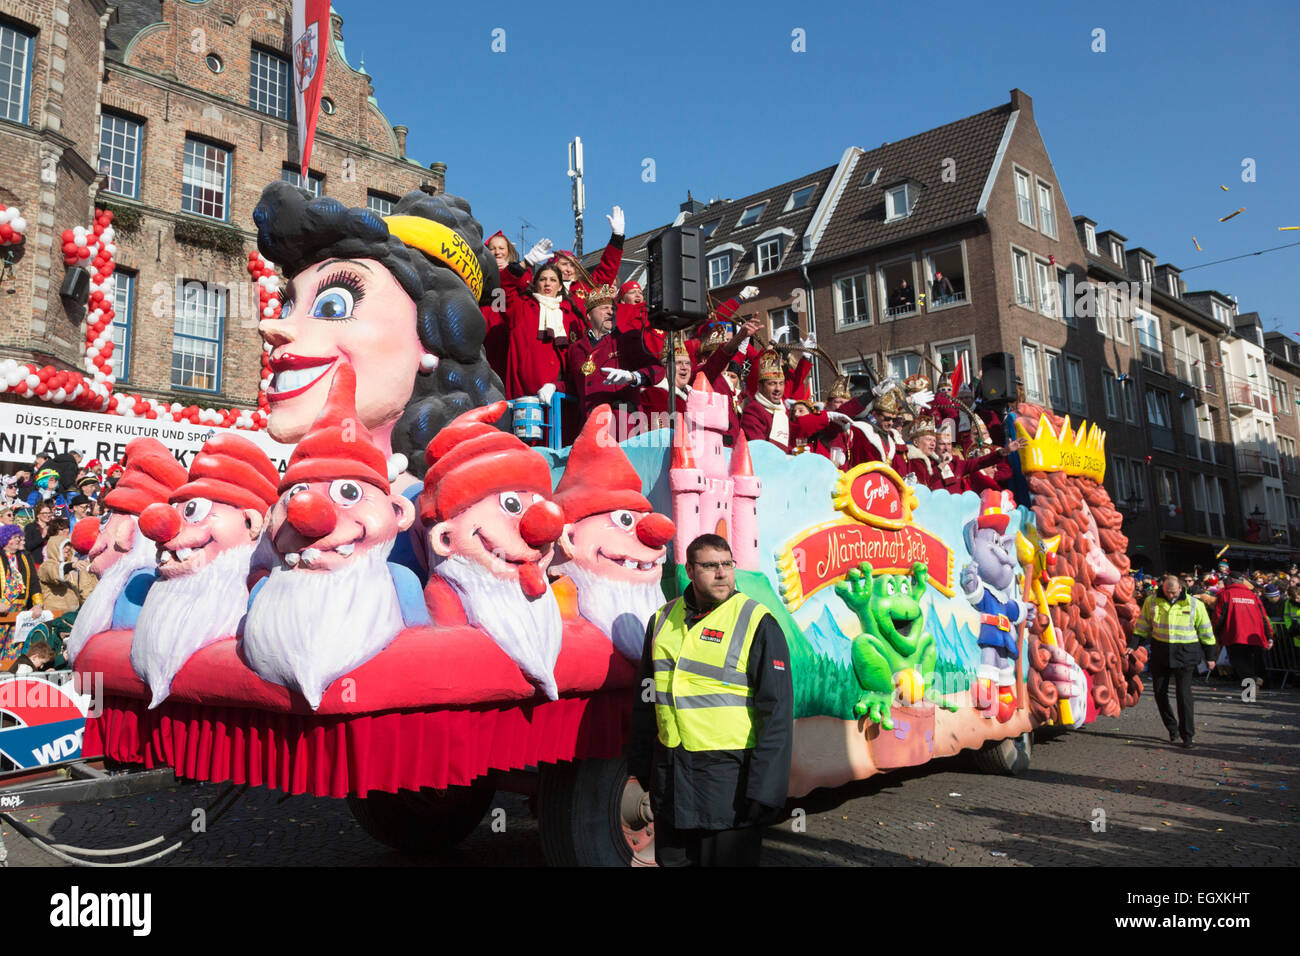 Düsseldorf, Germany. 16 February 2015. The traditional Shrove Monday (Rosenmontag) carnival parade takes place in Düsseldorf, Germany. 1.2 million revellers lined the route. The Monday parades went ahead despite increased terror warnings which led to the parade in Brunswick (Braunschweig) being cancelled shortly before it was due to take place. Stock Photo